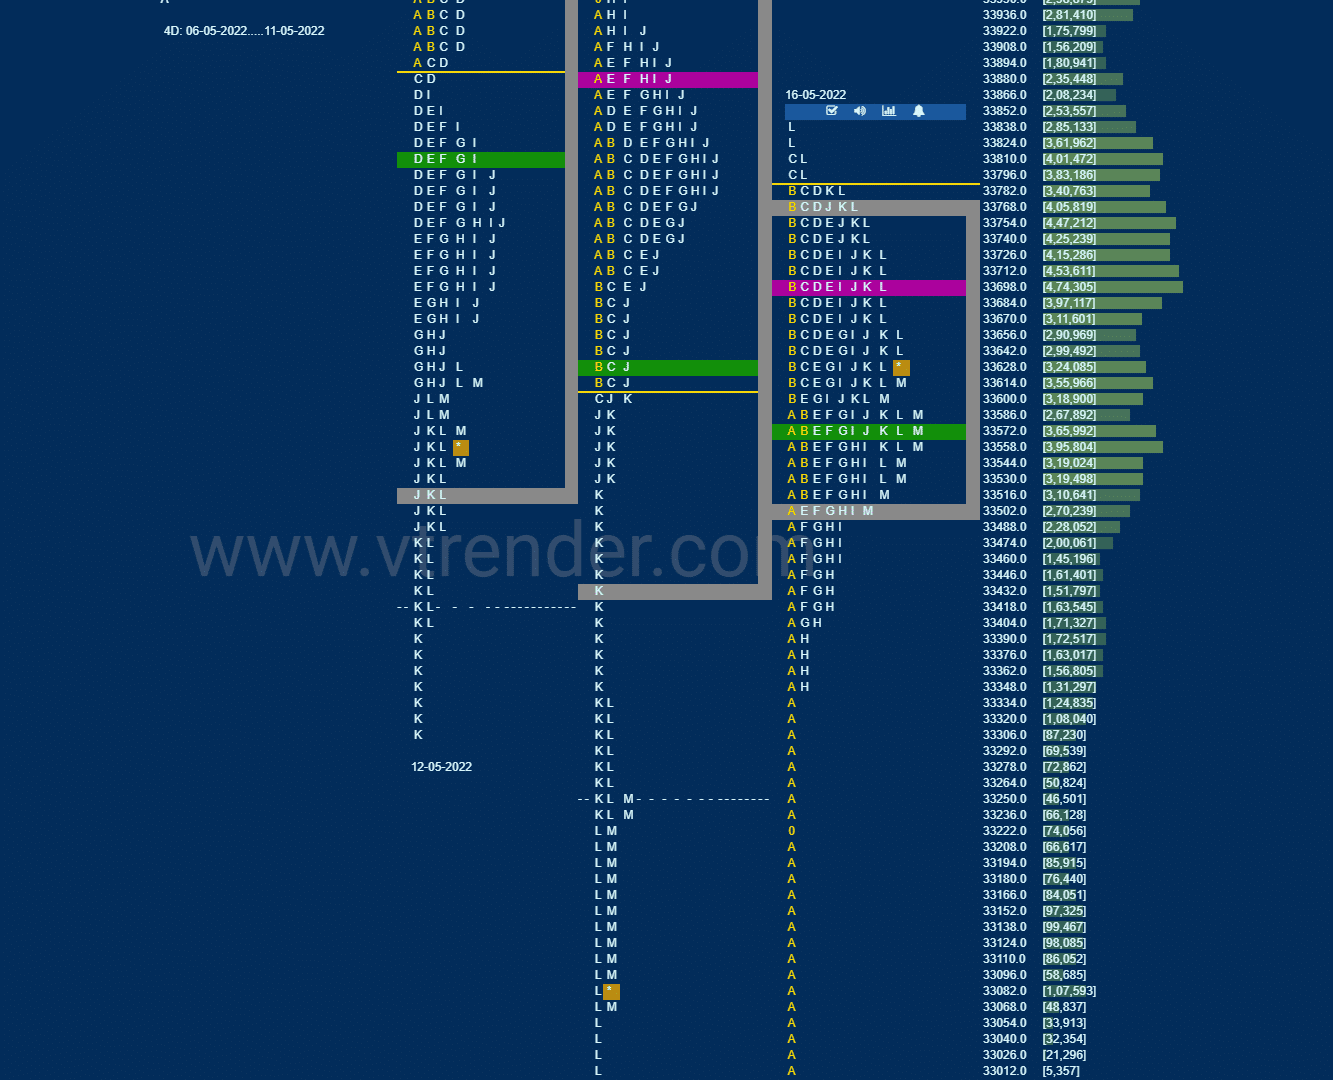 Bnf 10 Market Profile Analysis Dated 16Th May 2022 Banknifty Futures, Charts, Day Trading, Intraday Trading, Intraday Trading Strategies, Market Profile, Market Profile Trading Strategies, Nifty Futures, Order Flow Analysis, Support And Resistance, Technical Analysis, Trading Strategies, Volume Profile Trading